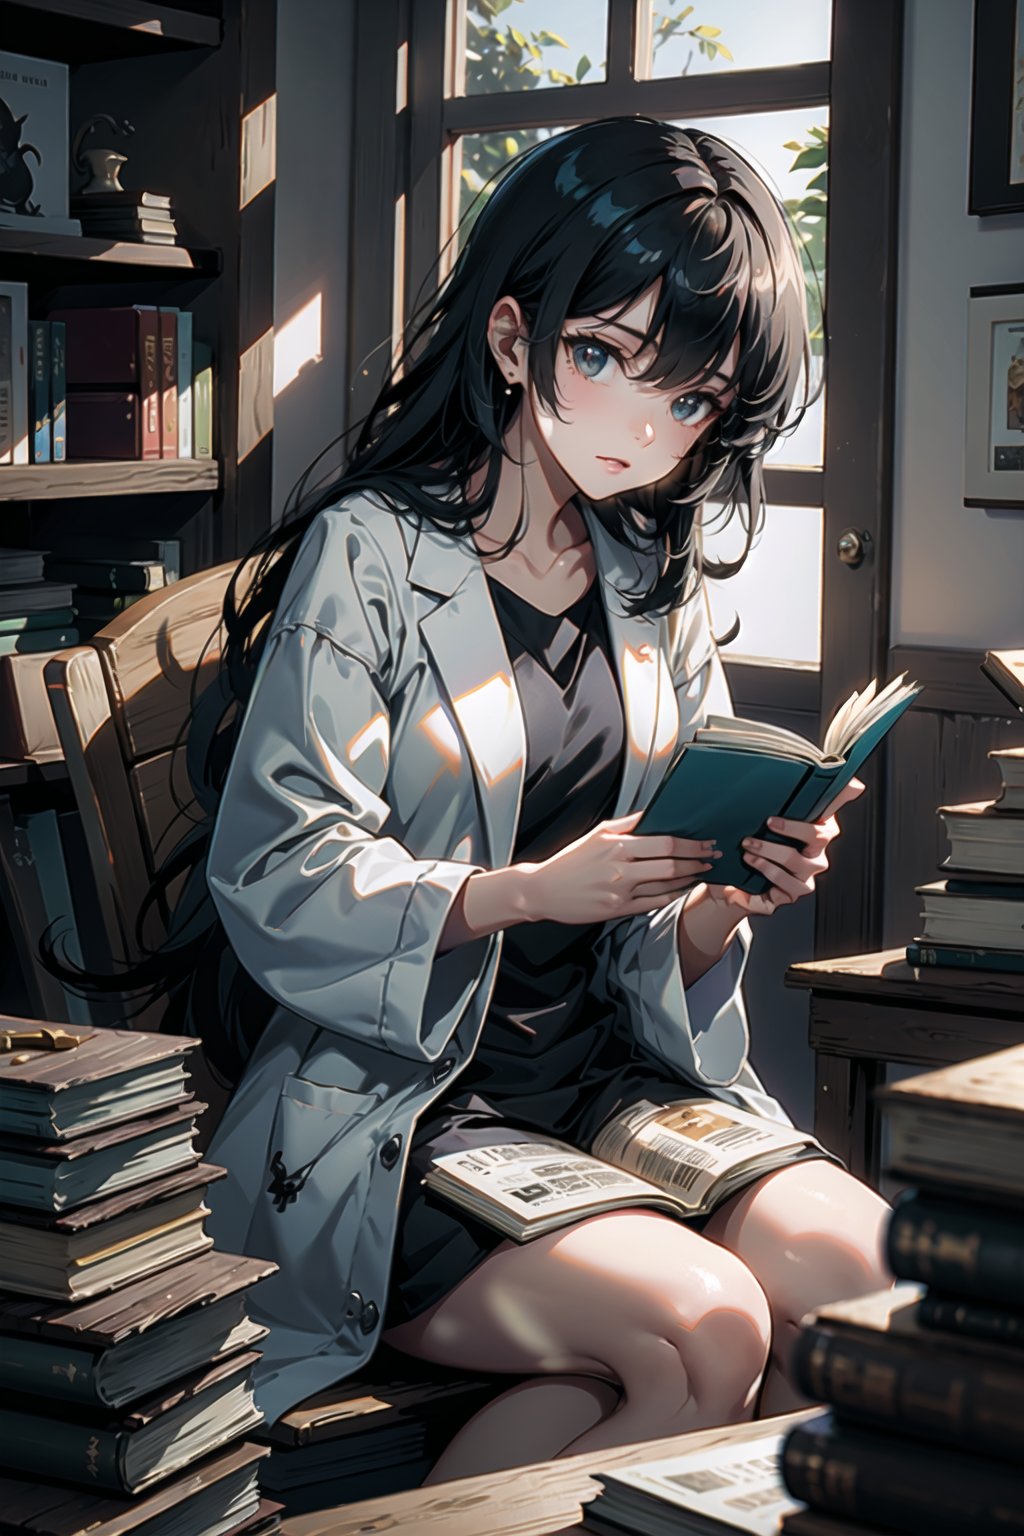 1female, cinematic lighting, movie angle shot, beautiful women researcher sit on chair reading a book, a lot of book on background, sunlight, stack of books, white lab coat, anime style, she focused on reading, messy room, hyper detailed, wooden chir, wooden_floor, wooden room ,perfecteyes